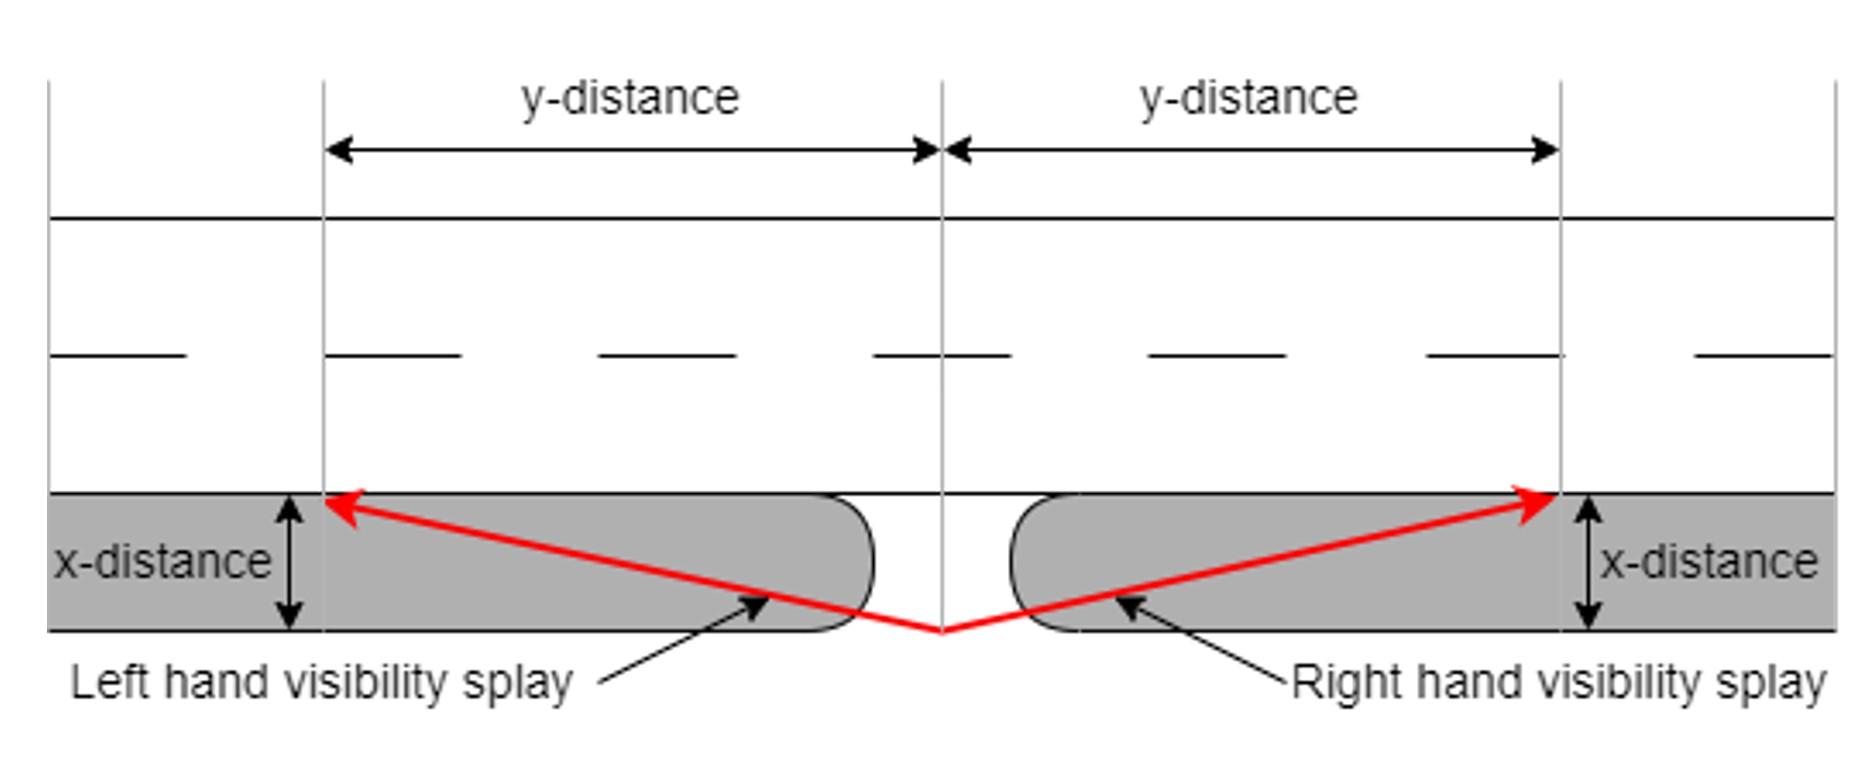 Image illustrating how to calculate the y and x distances